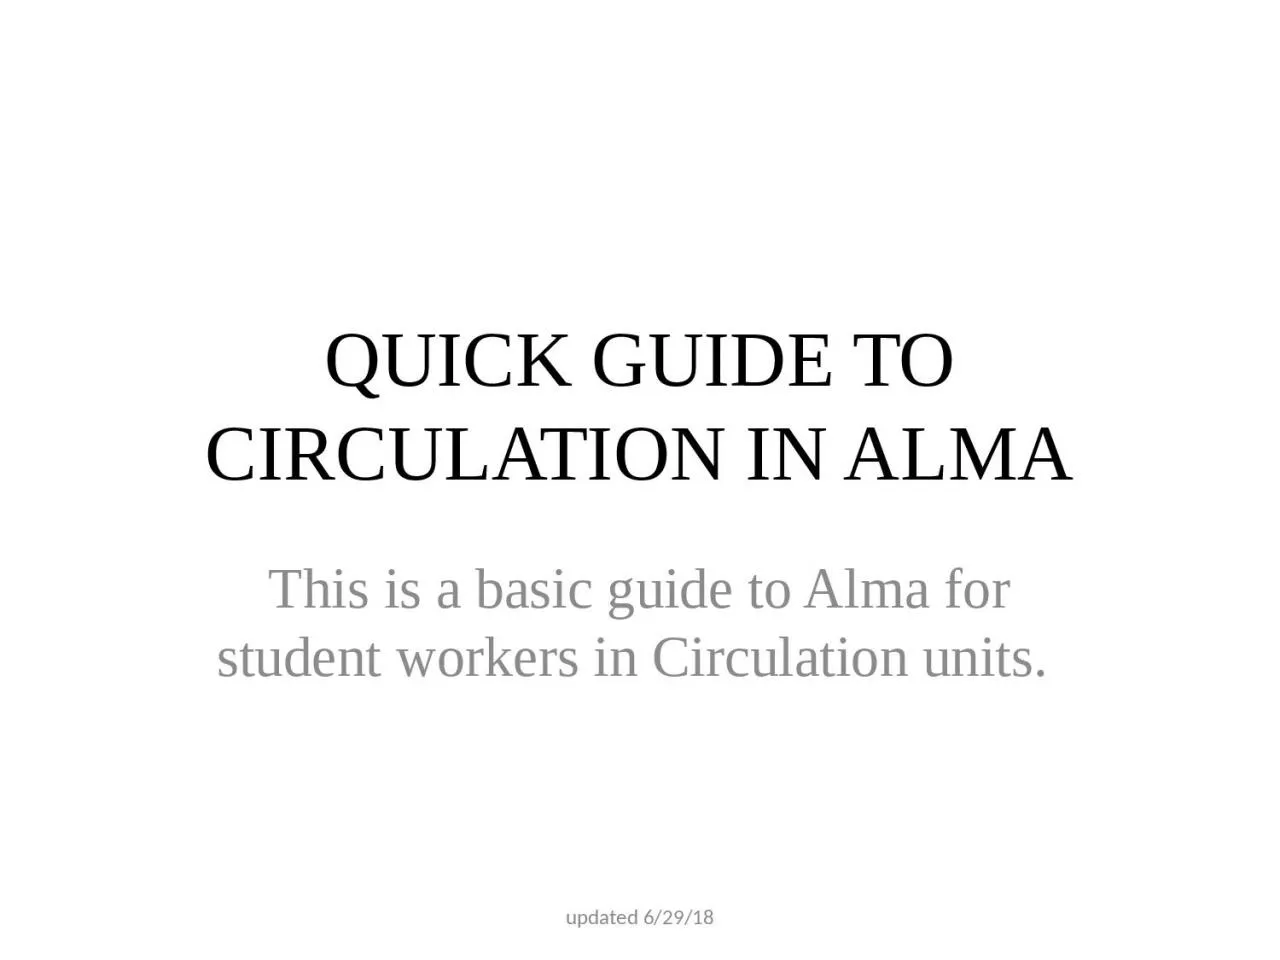 QUICK GUIDE TO CIRCULATION IN ALMA